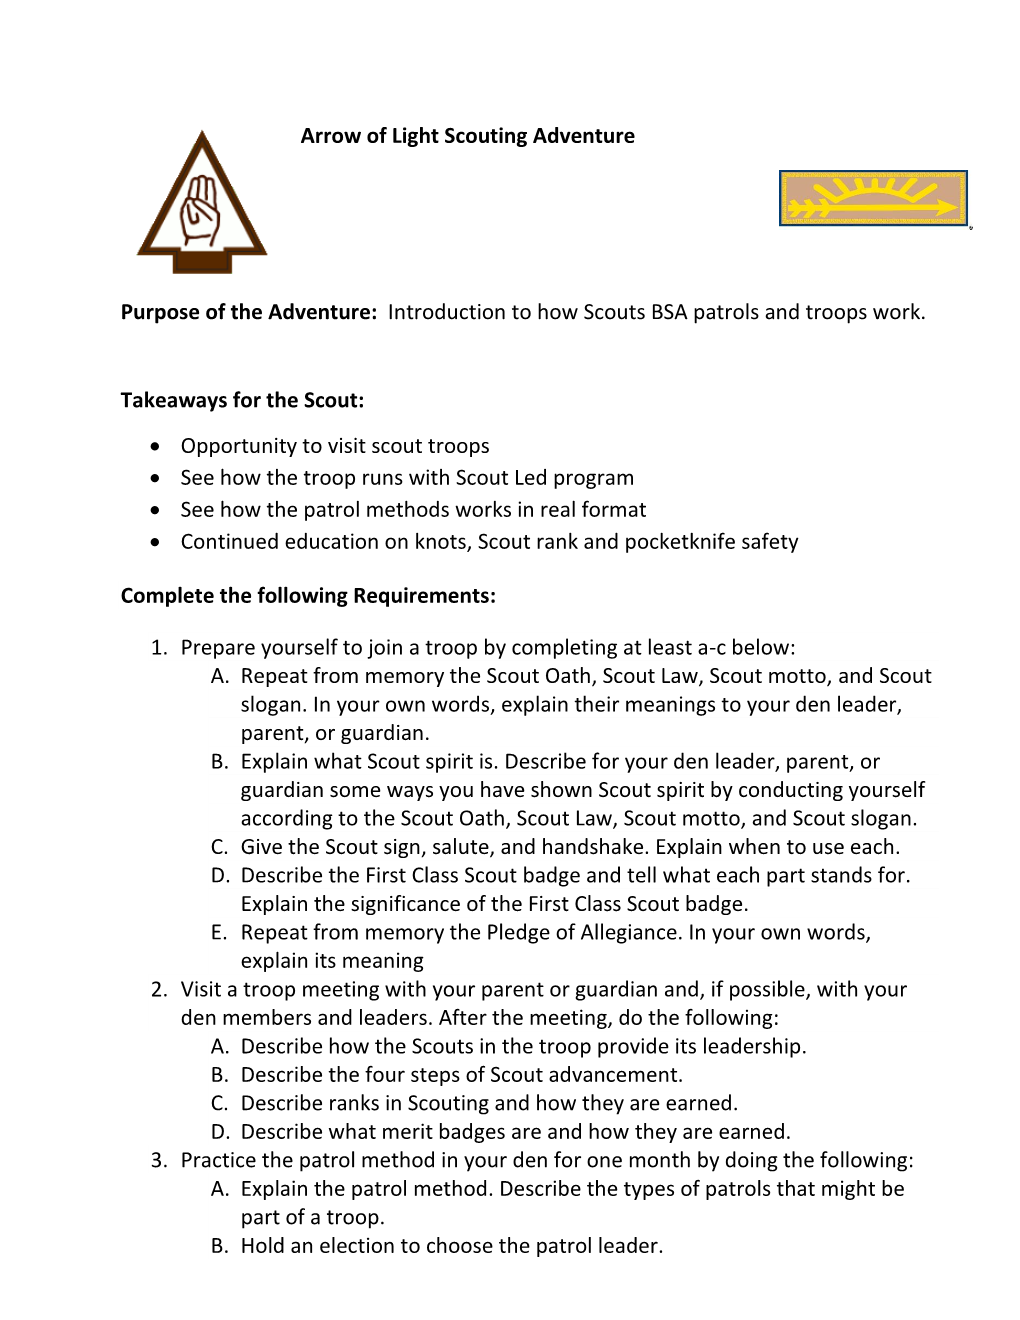 Arrow of Light Scouting Adventure Purpose of the Adventure: Introduction to How Scouts BSA Patrols and Troops Work. Takeaways Fo